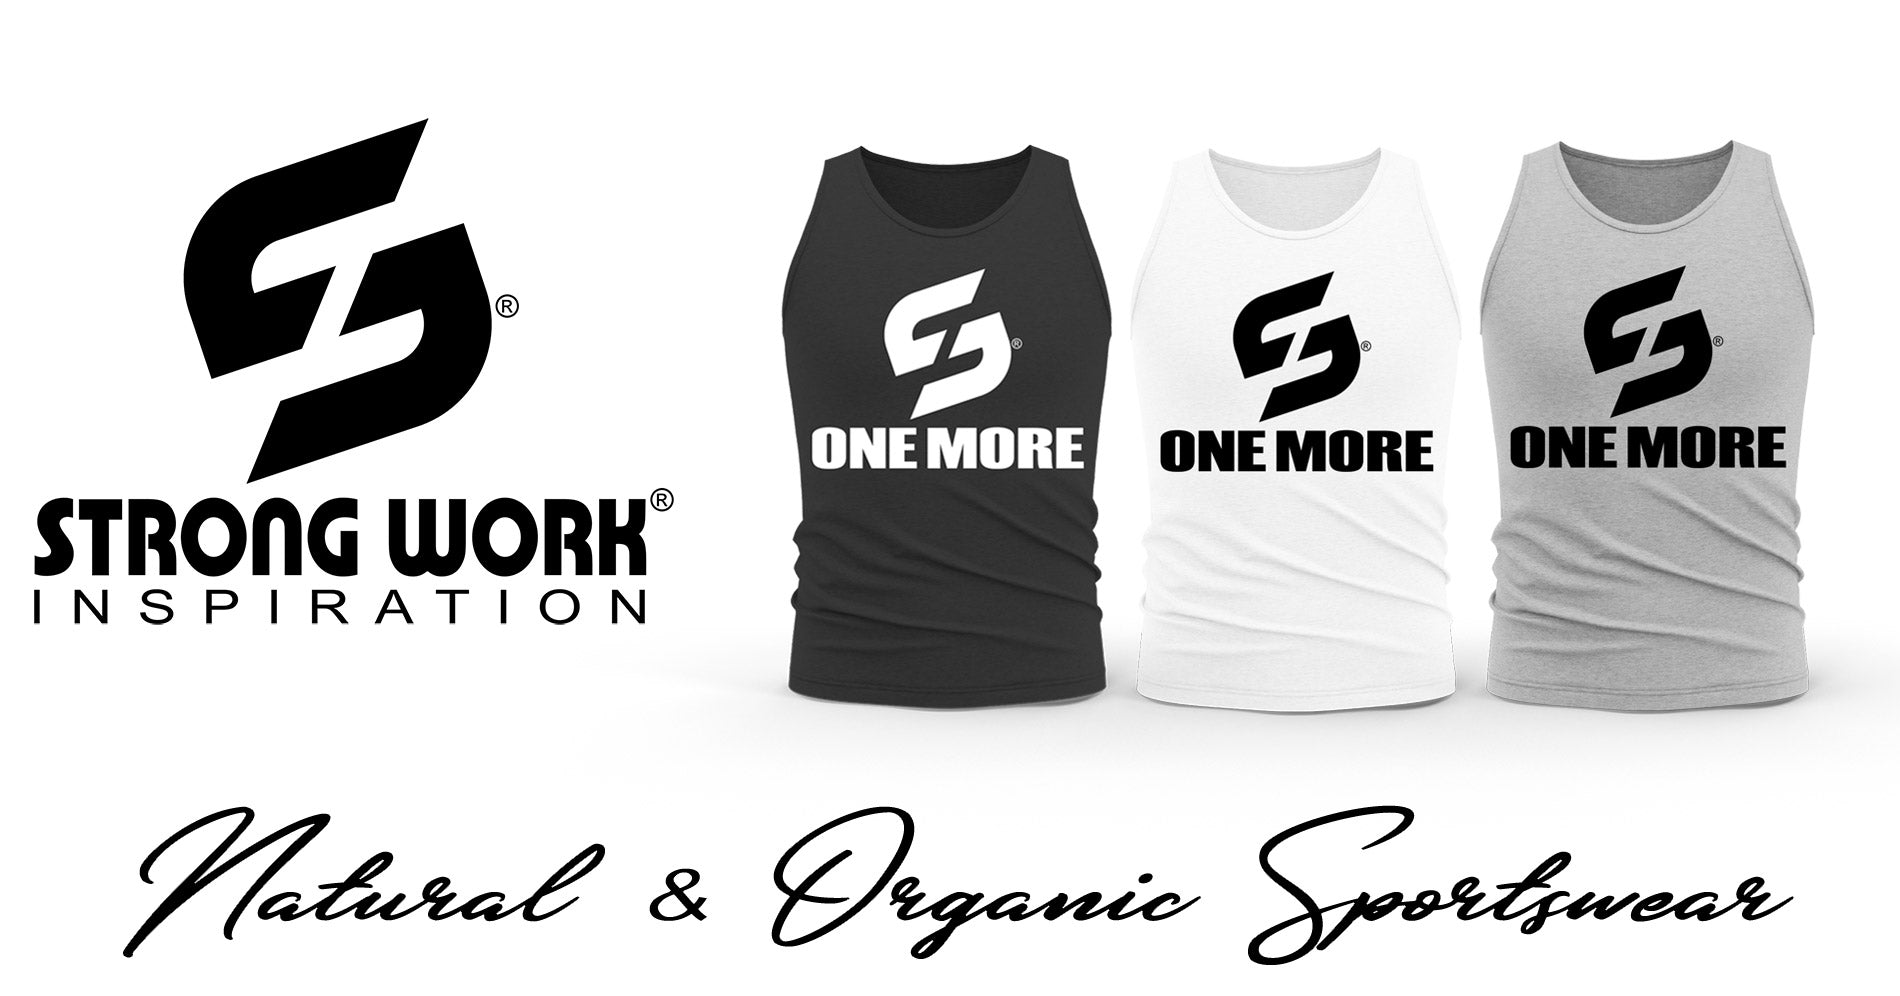 STRONG WORK TANK TOP "ONE MORE" FOR WOMEN